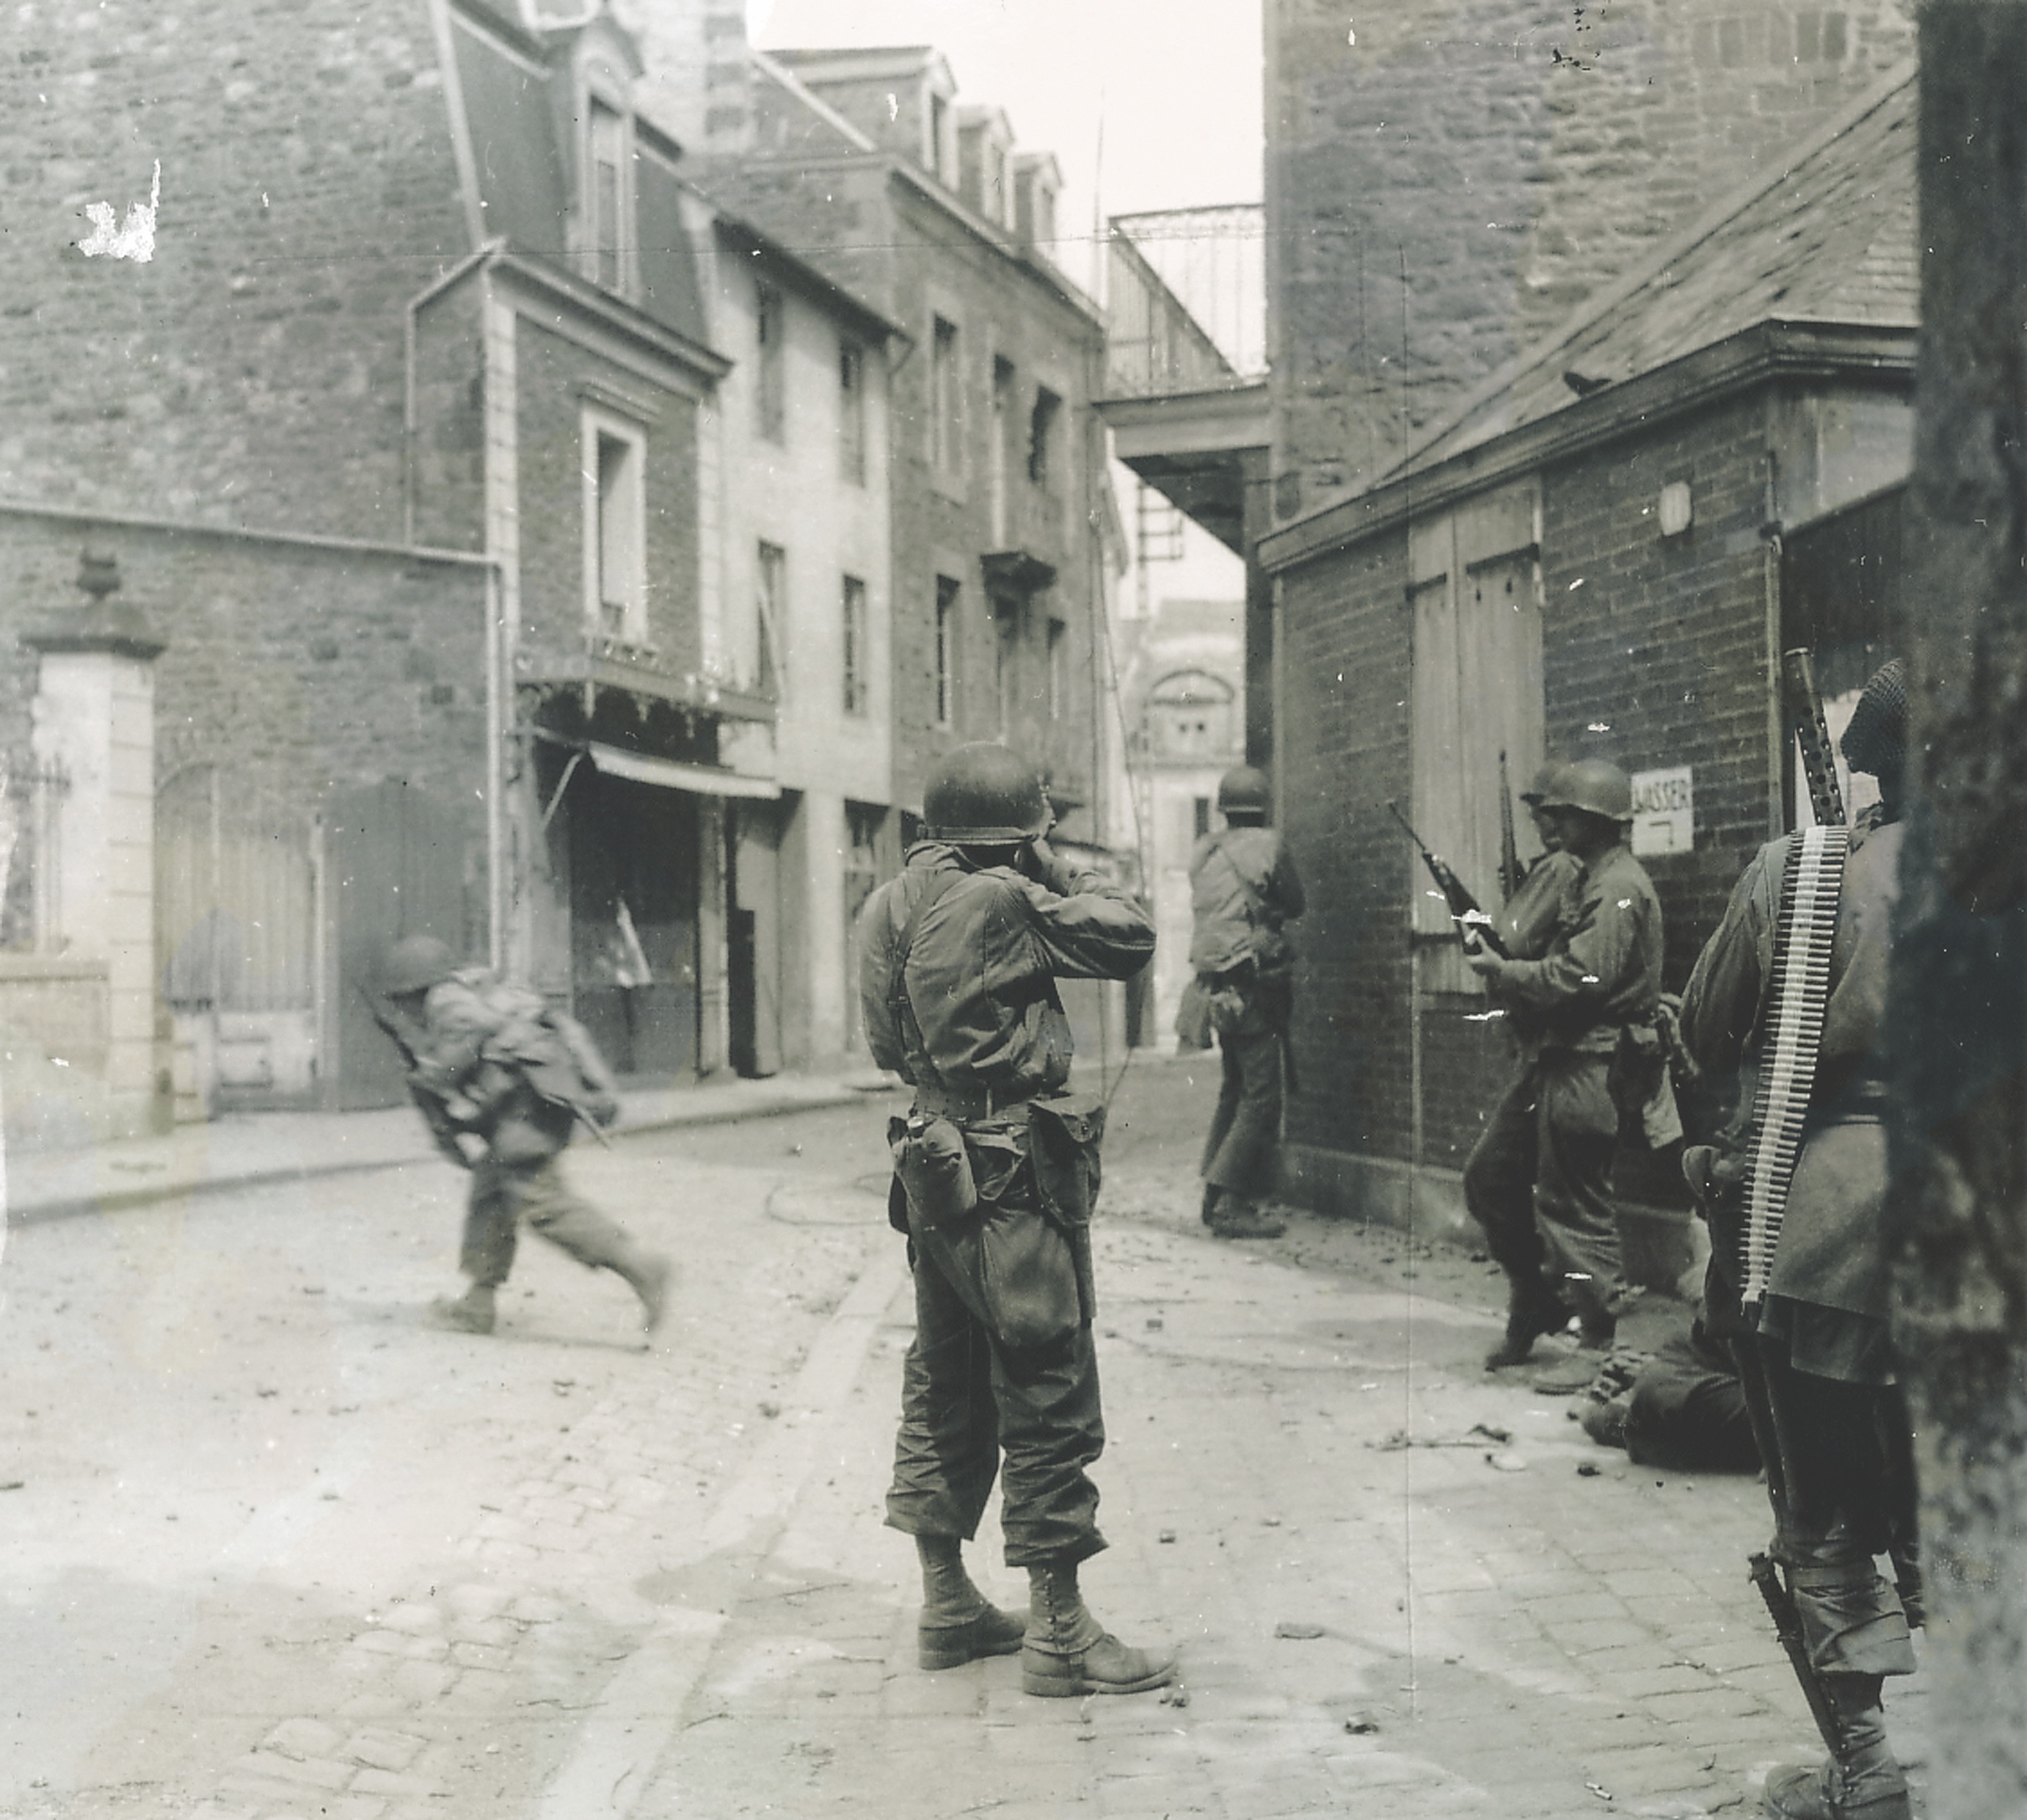 American infantrymen try to take out a German sniper during street fighting in Saint-Malo on August 8, 1944. (Keystone-France, Photo 12, Getty Images)